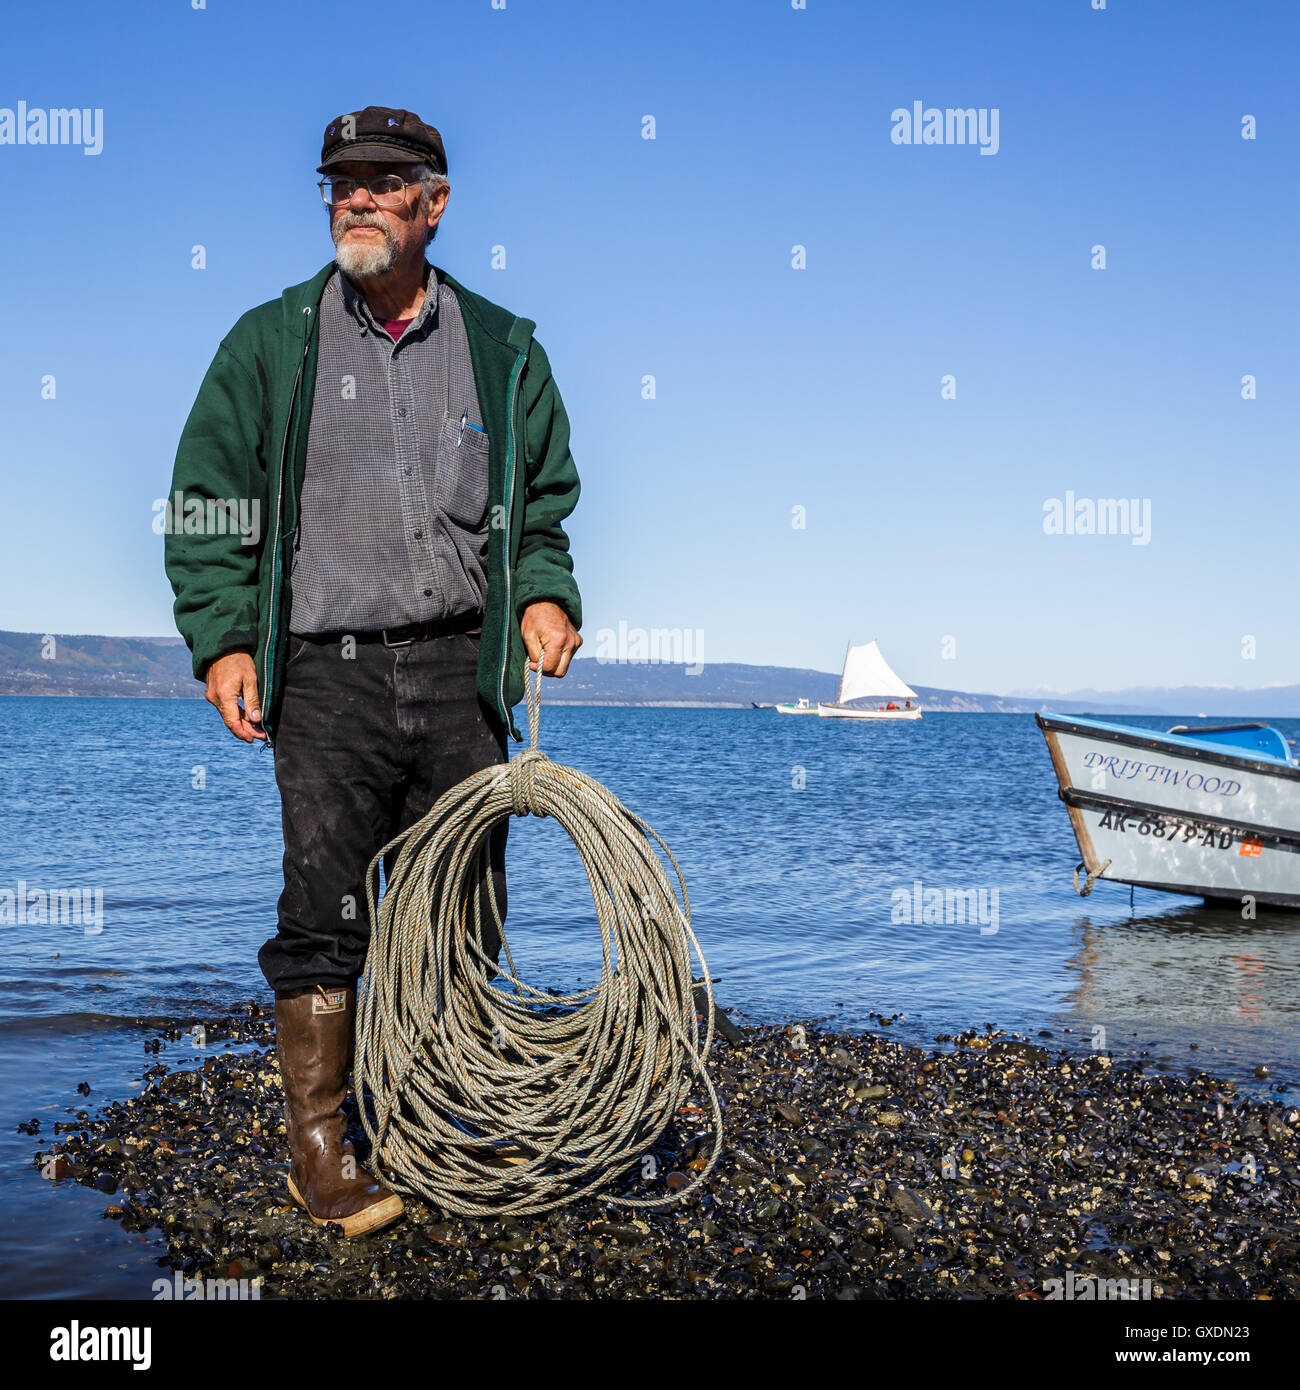 https://c8.alamy.com/comp/GXDN23/a-man-stands-on-the-beach-next-to-the-sea-holding-a-coil-of-rope-held-GXDN23.jpg